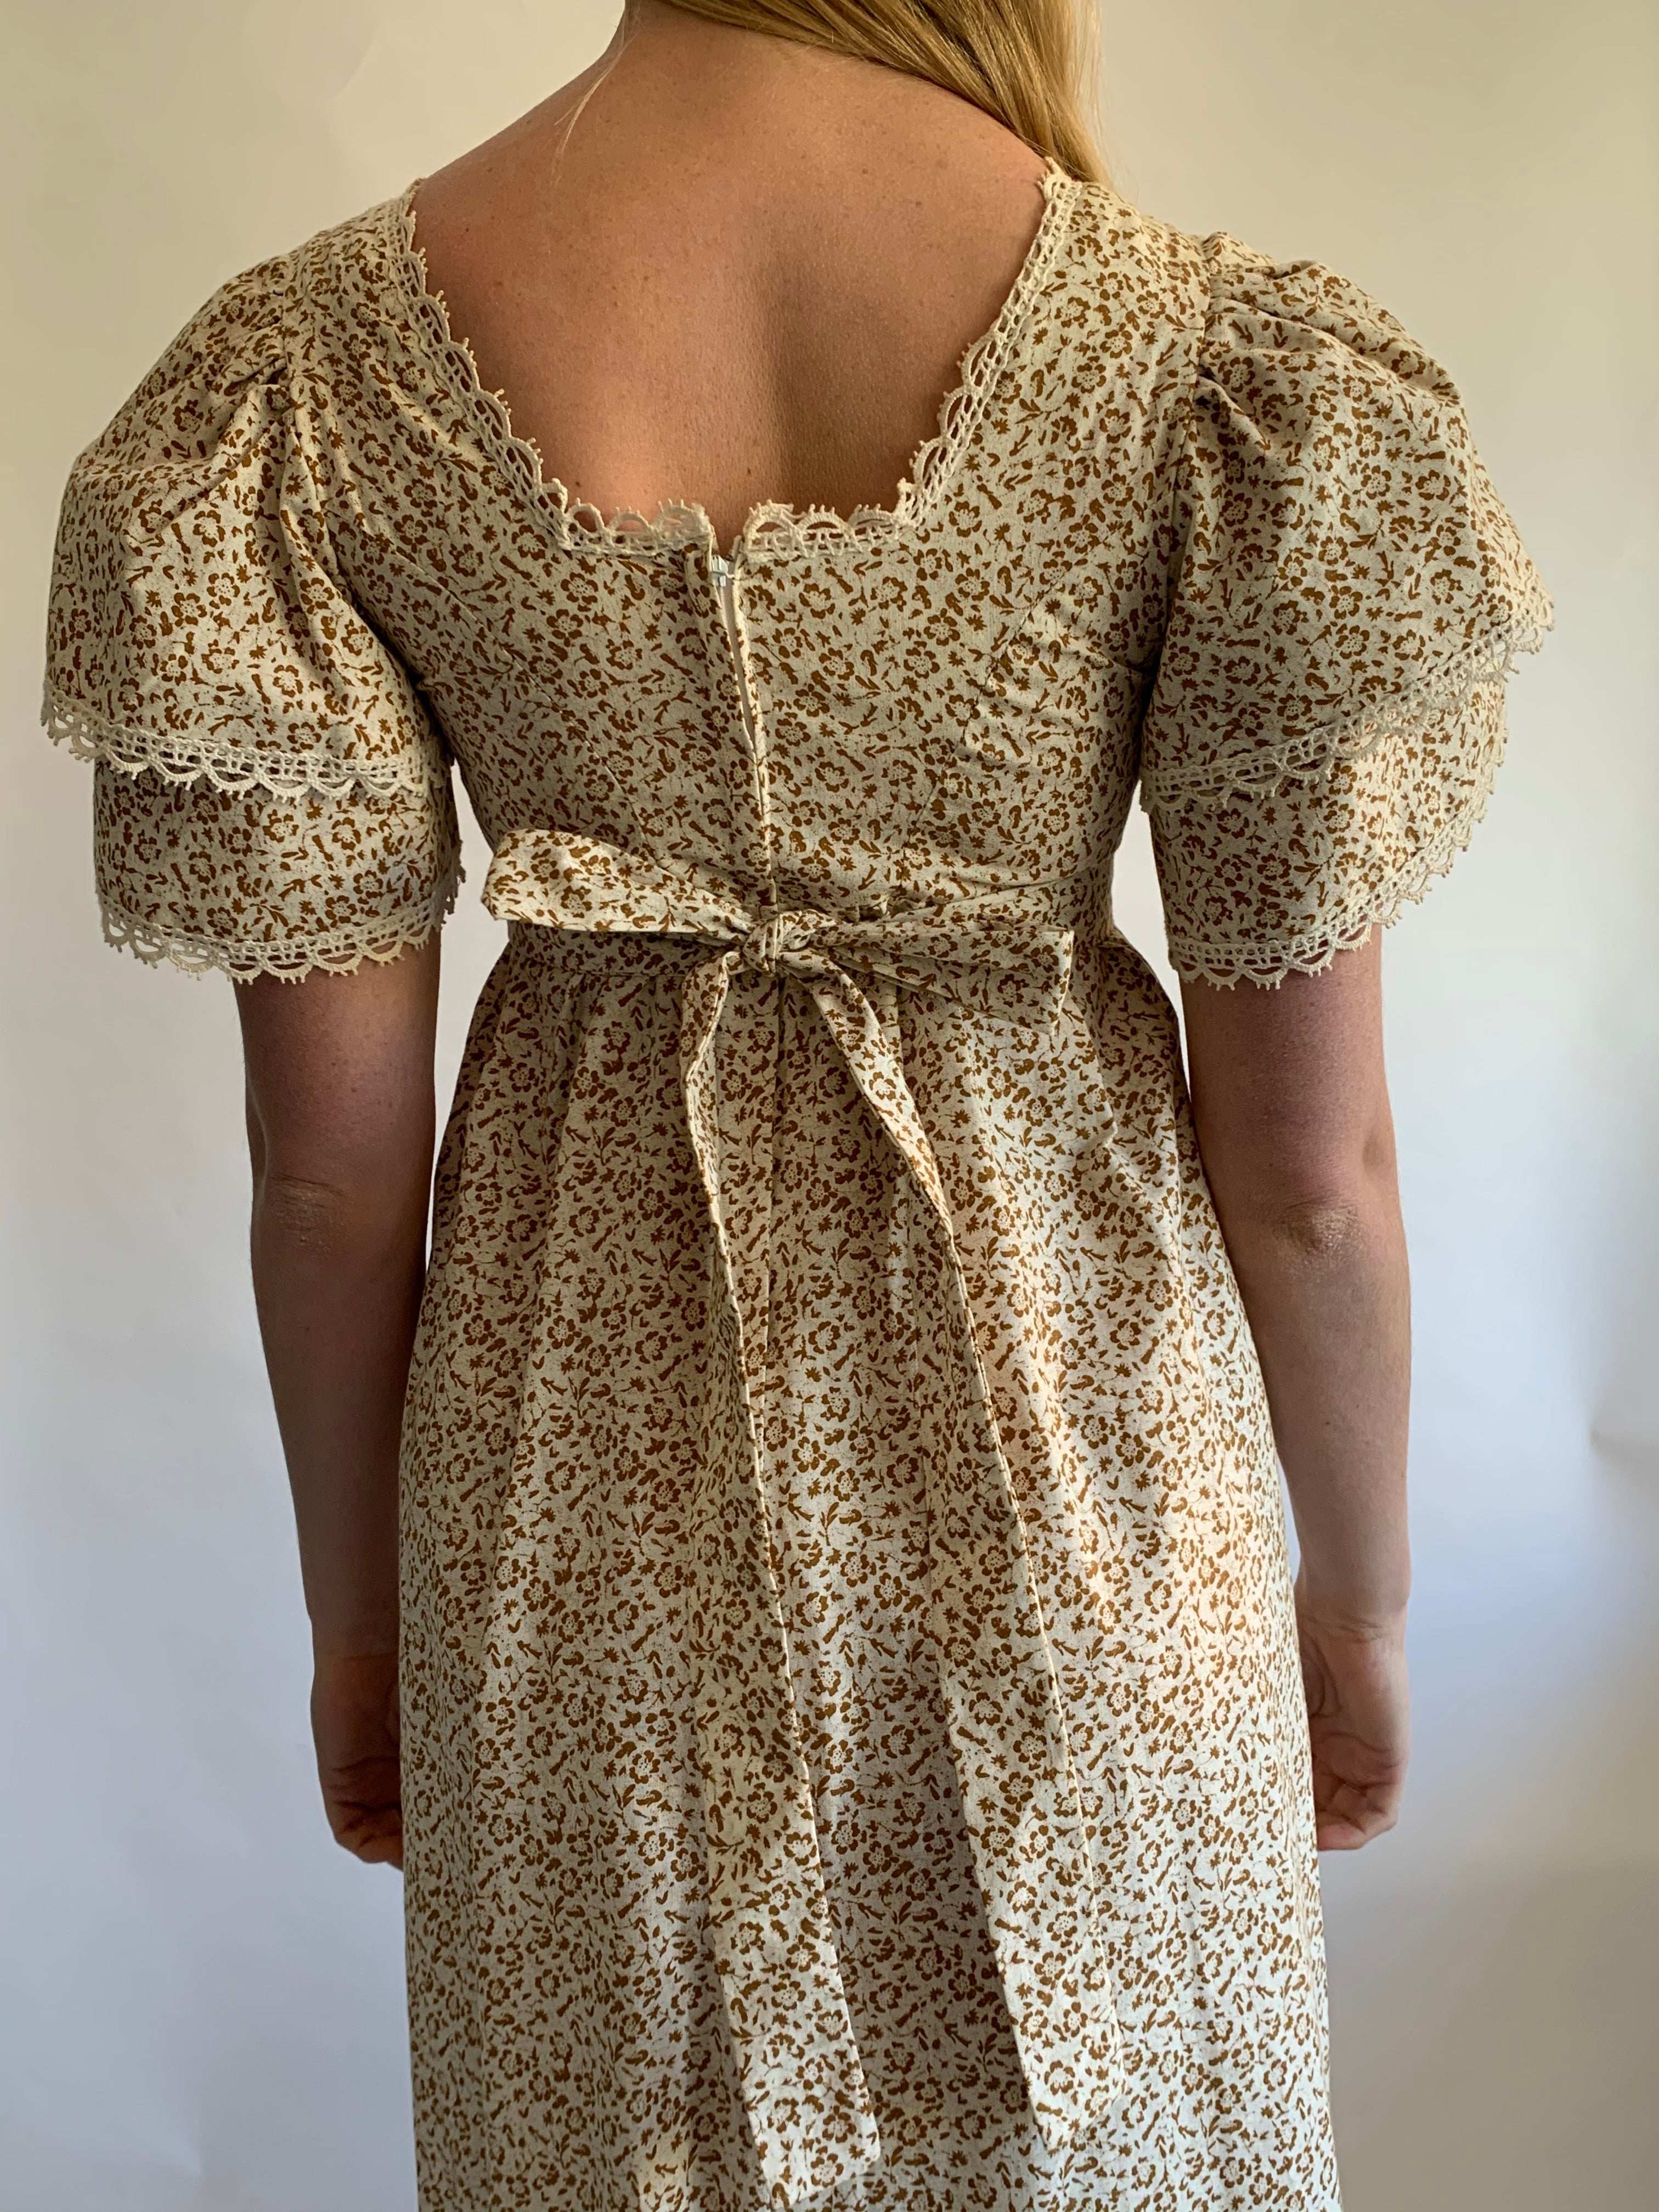 Laura Ashley Cream and Brown Floral Print Dress